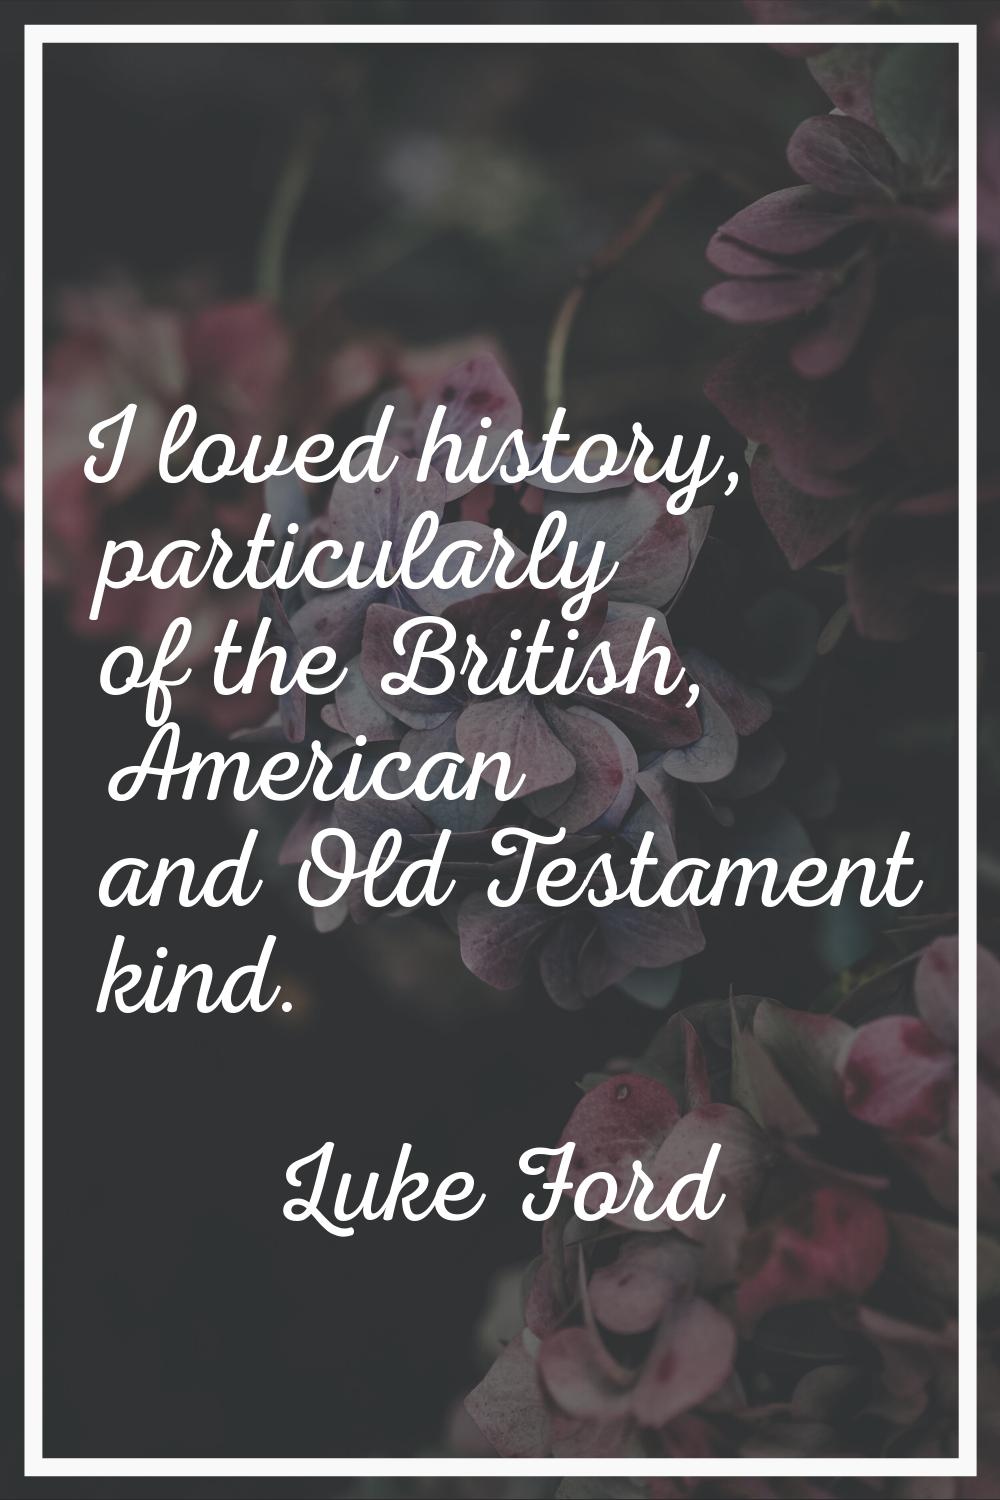 I loved history, particularly of the British, American and Old Testament kind.